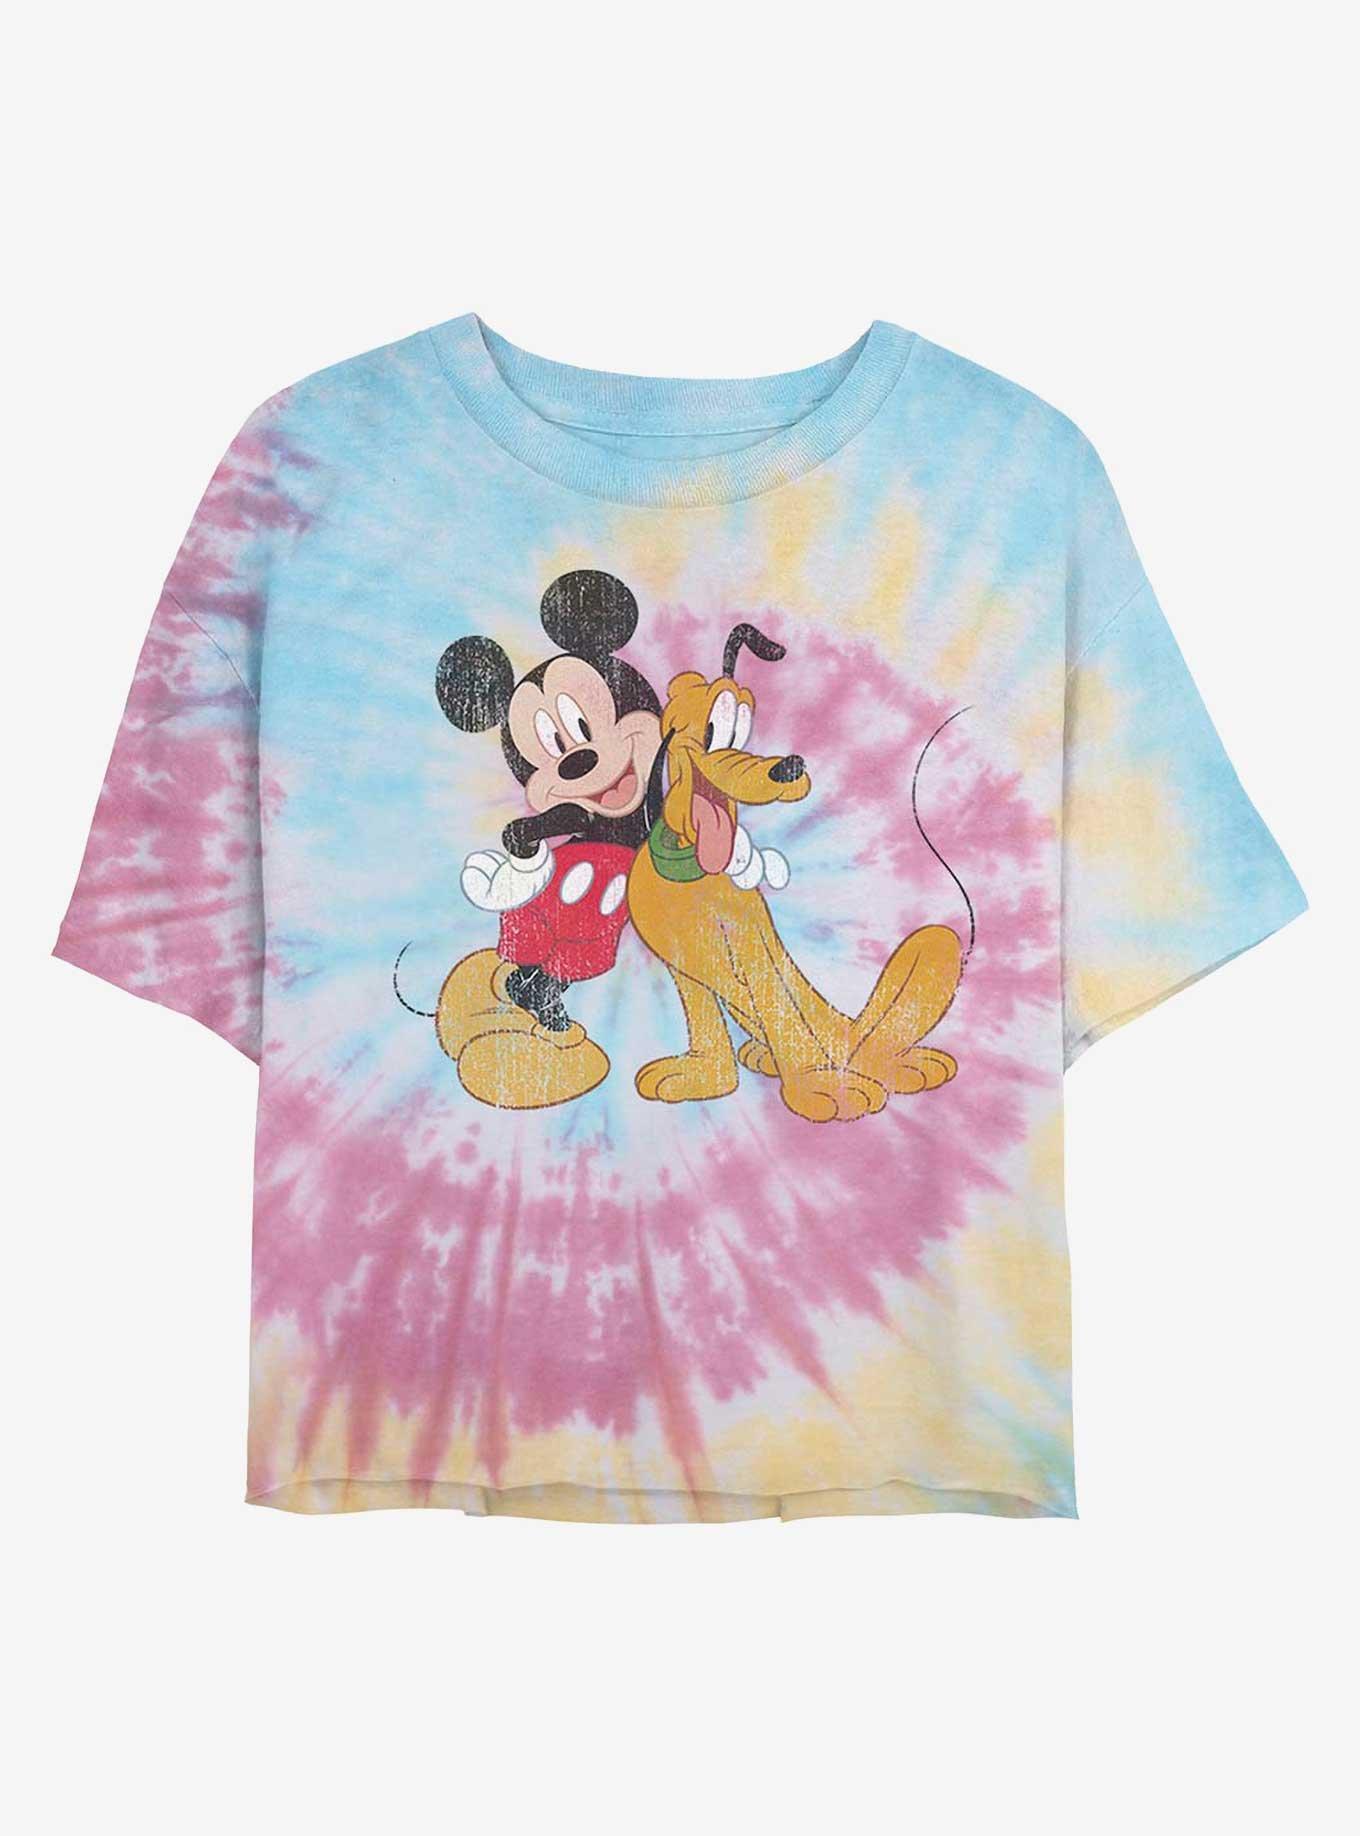 Disney Mickey Mouse Mickey and Pluto Tie Dye Crop Girls T-Shirt, BLUPNKLY, hi-res